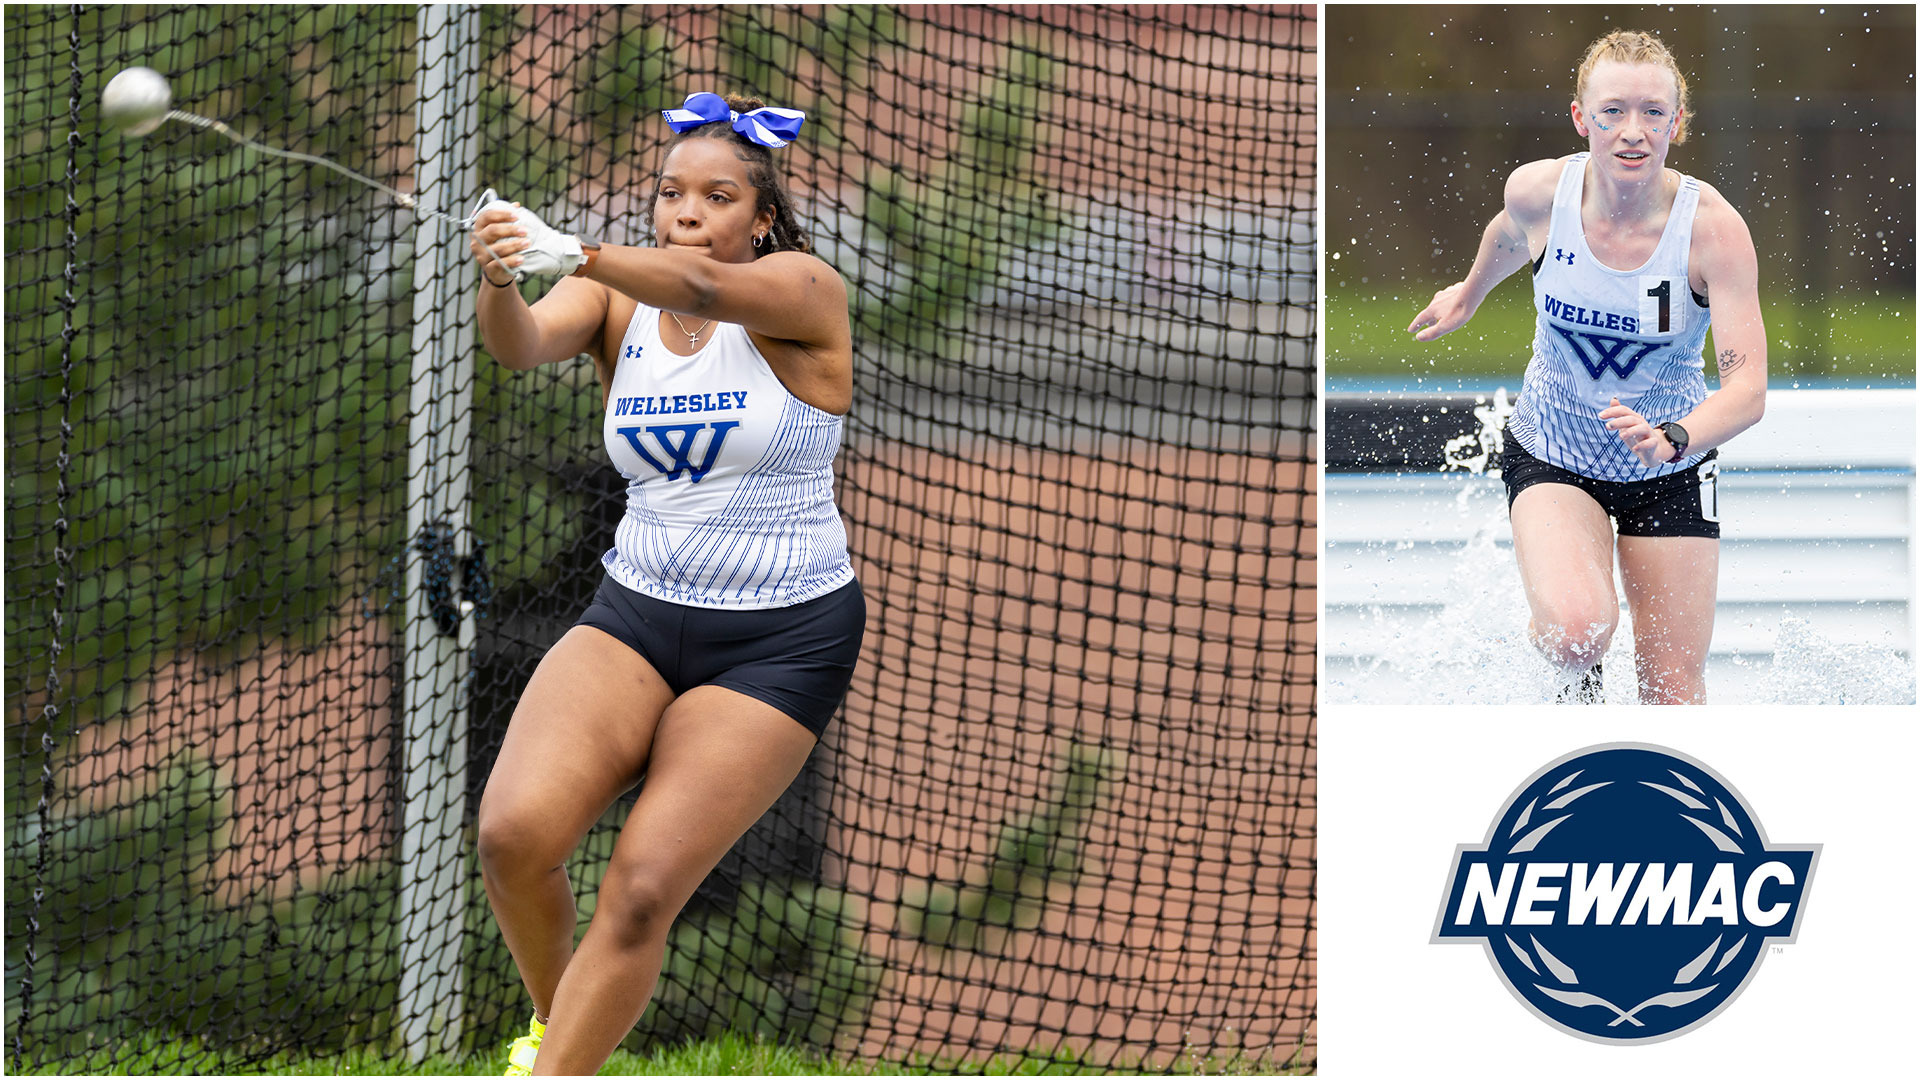 Kenya Francis '26, Simone Beauchamp '26 and Wellesley track &amp; field race at the NEWMAC Championships April 26-27 (Frank Poulin)